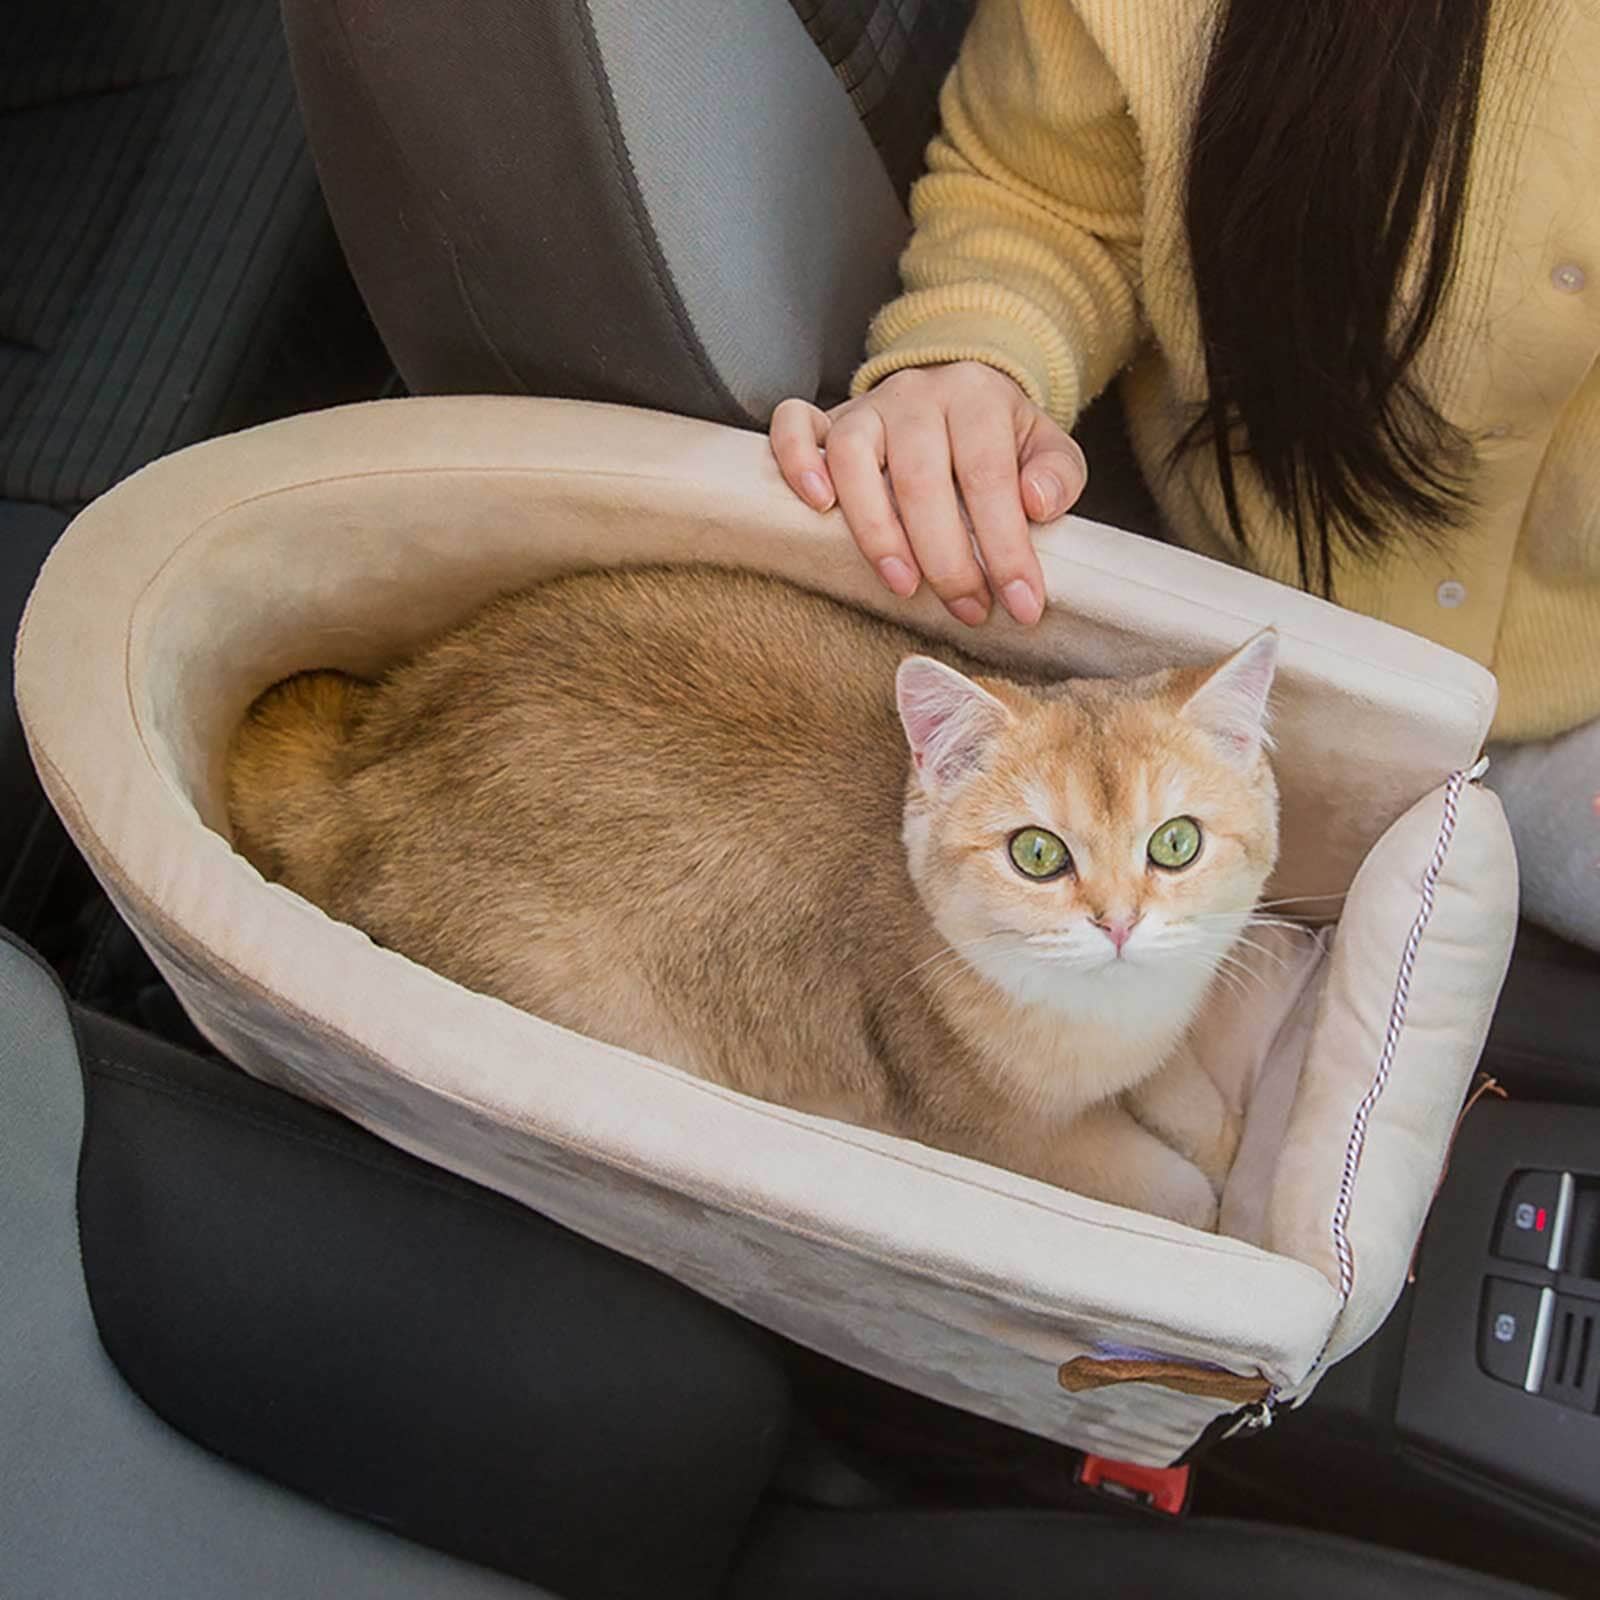 Brown Car Seat Car Seat for Dogs Car Seat for Cats Car Seat 